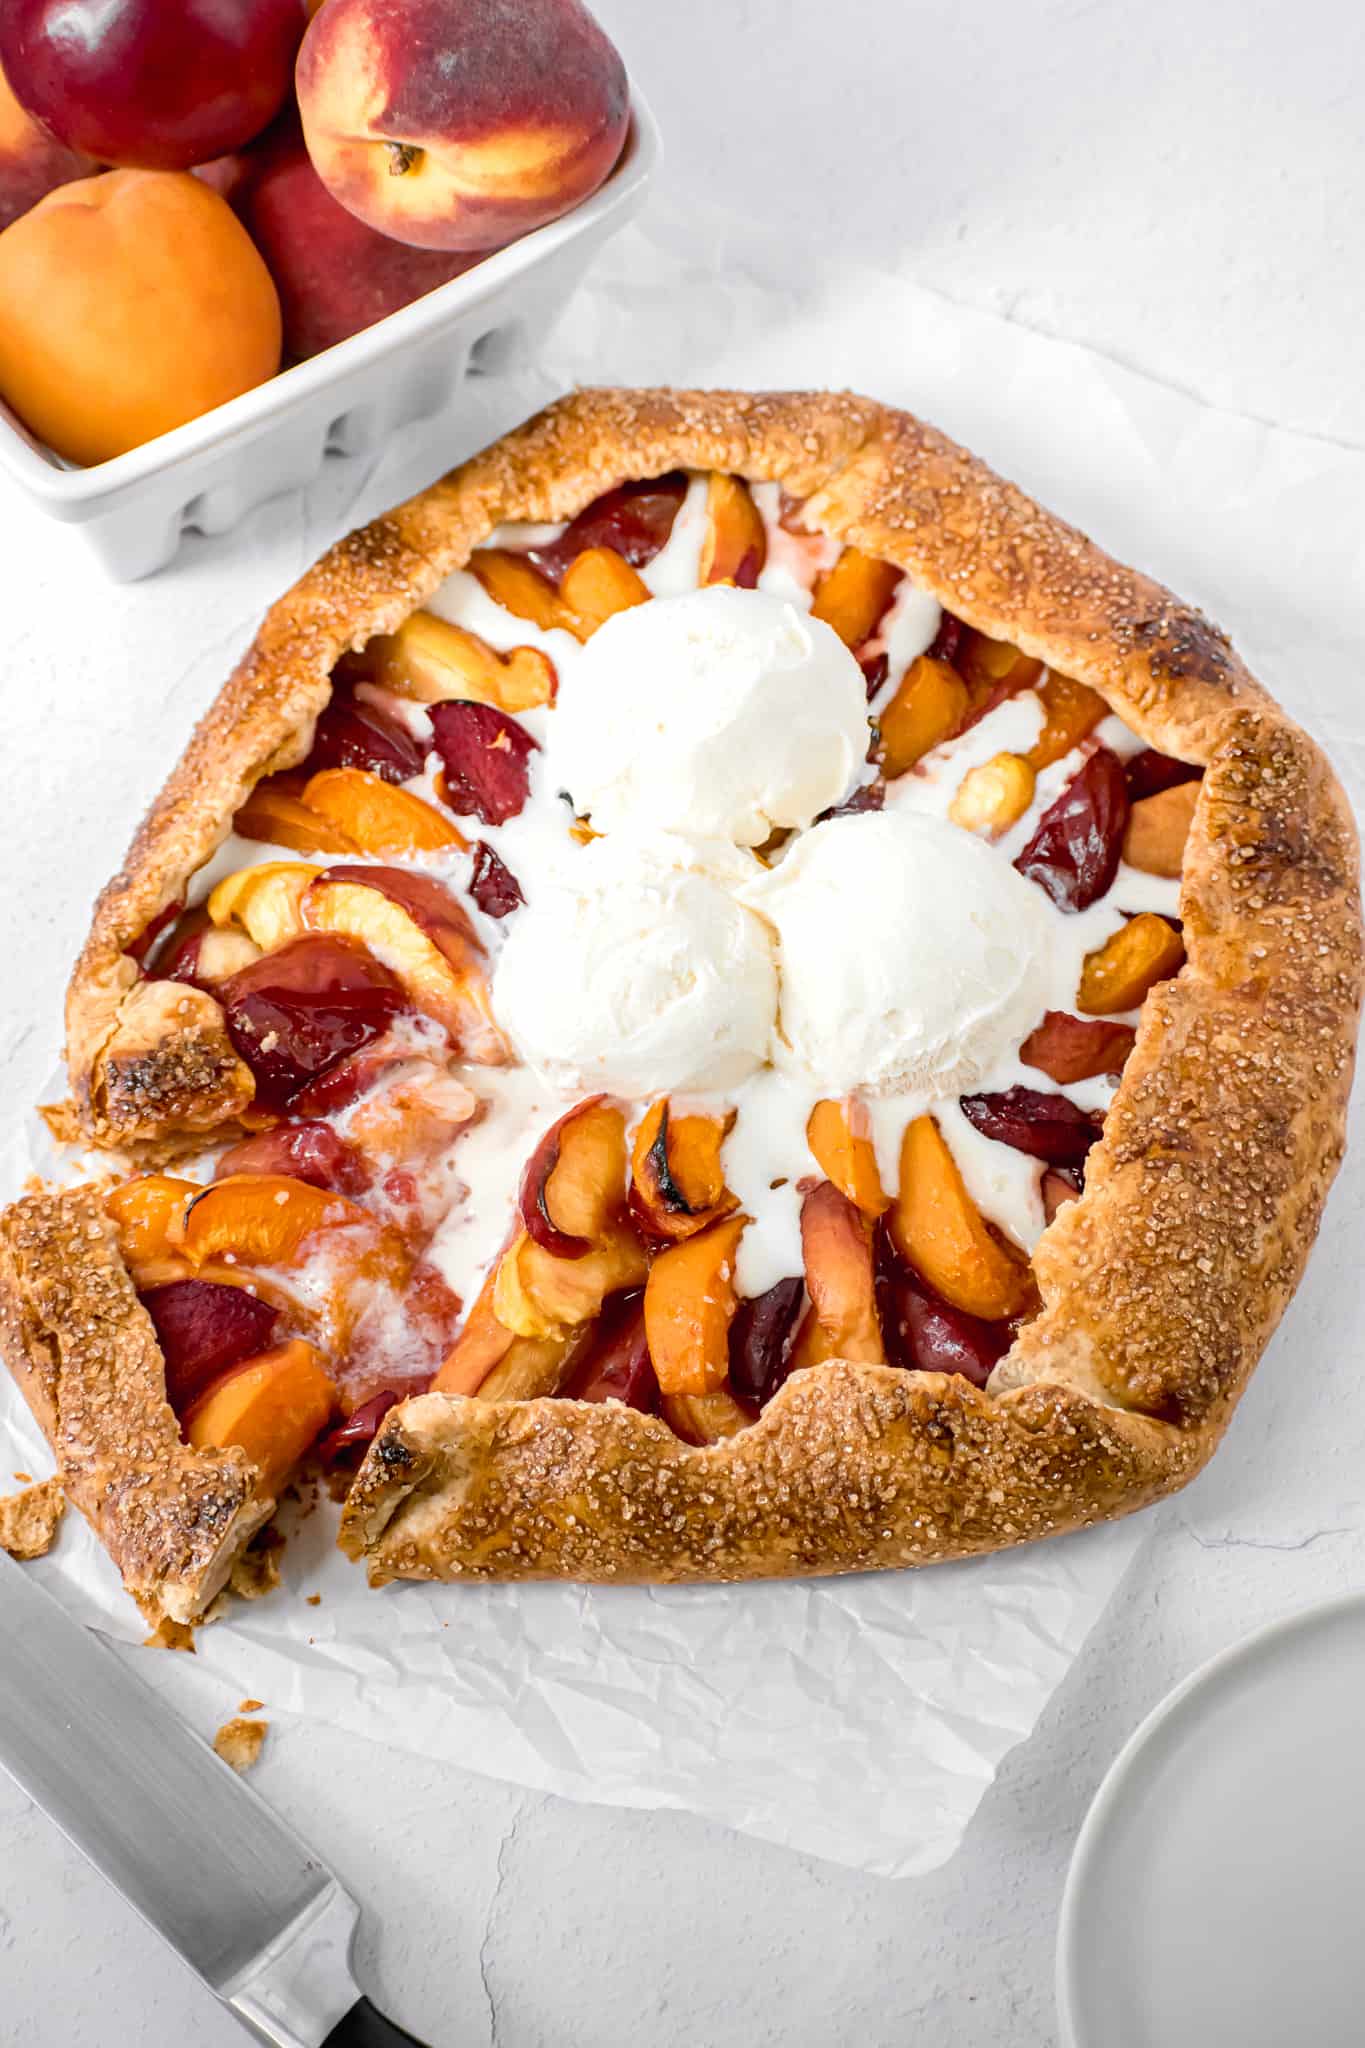 stone fruit galette on parchment paper with ice cream on top.